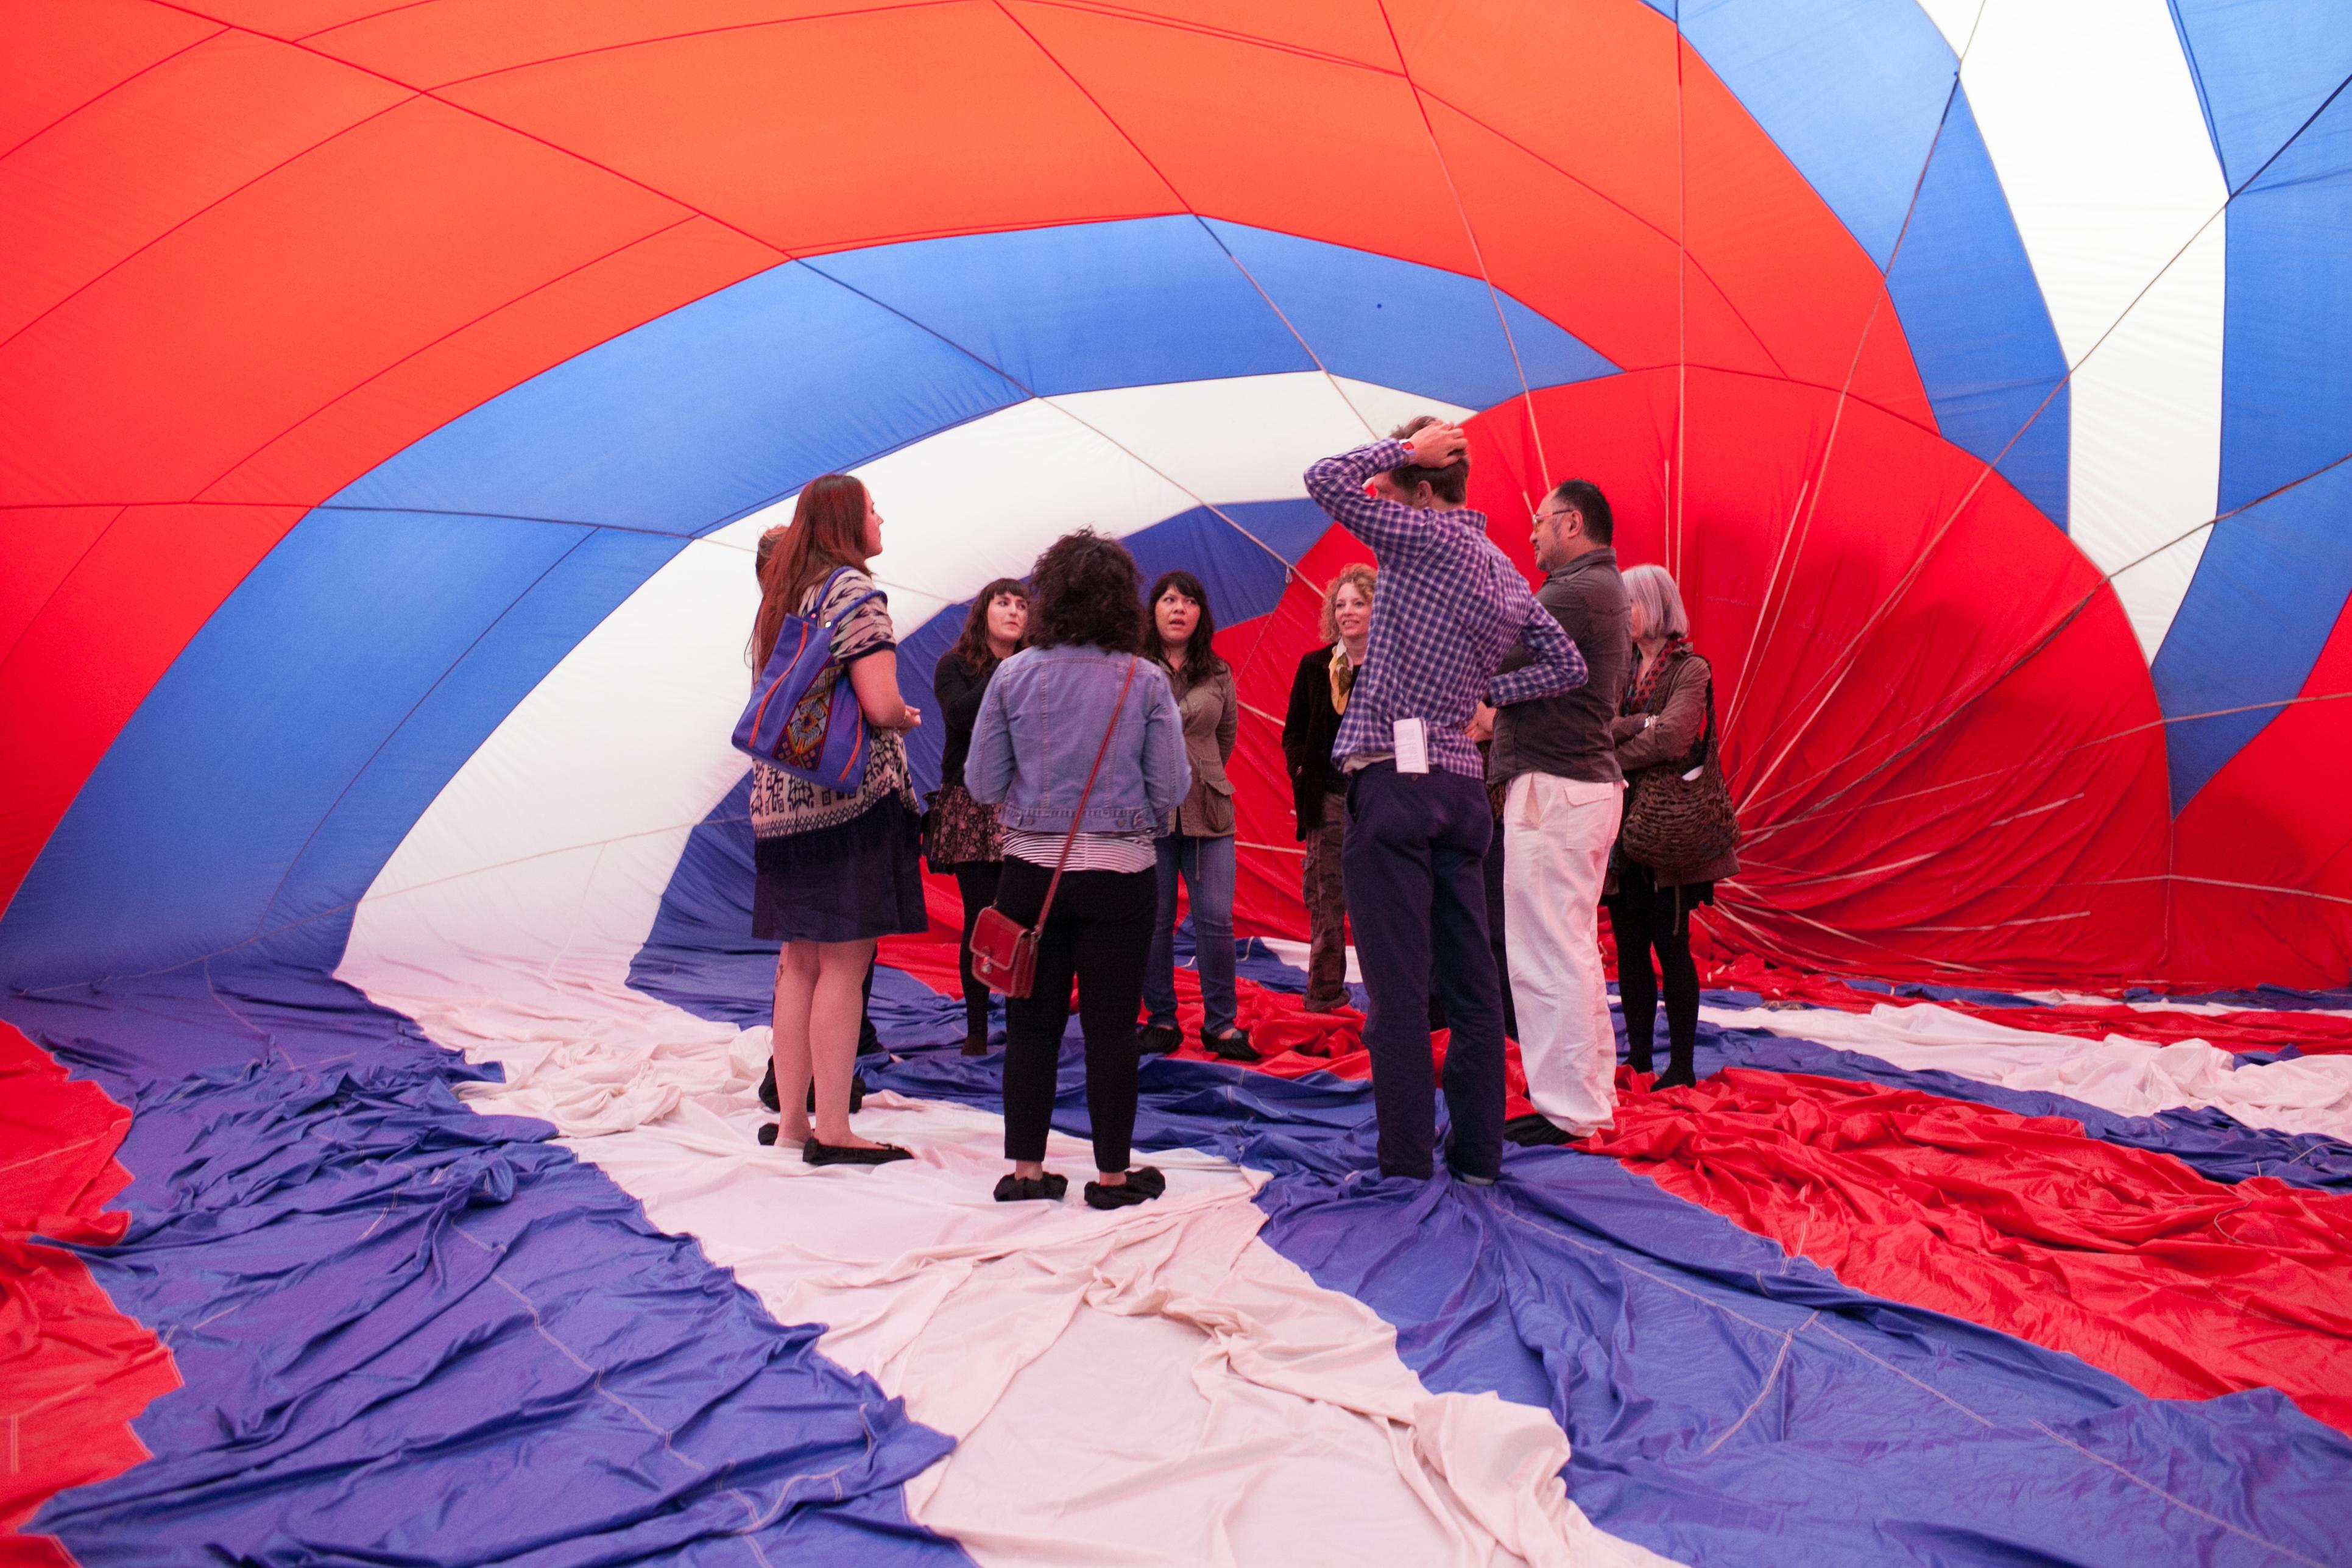 A group of people stands inside a large, fabric structure with red, white, and blue stripes.